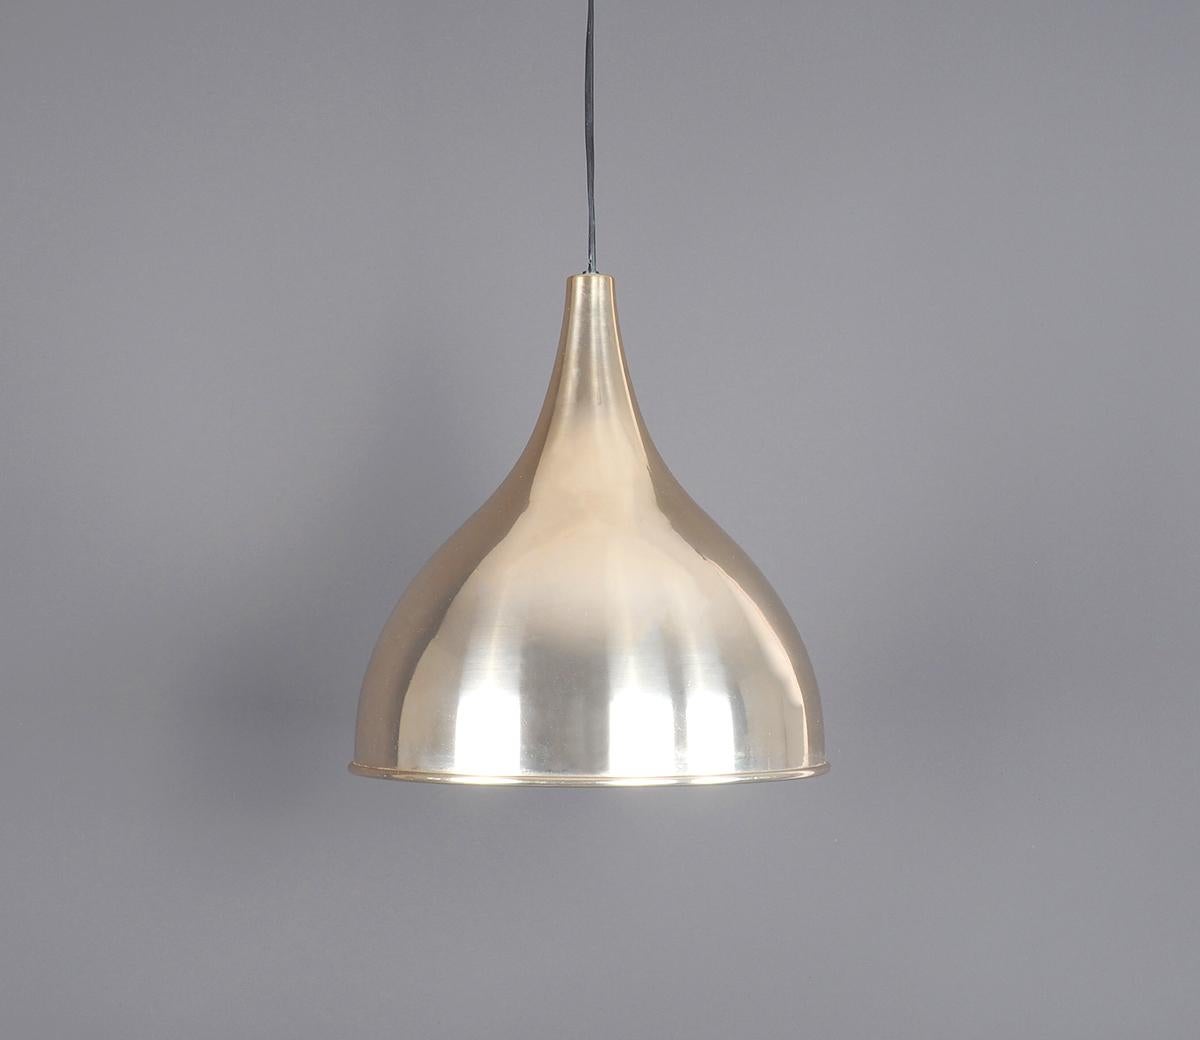 Elegant timeless organically shaped metal hanging lamp designed by Jo Hammerborg.
Model Silhouettete, produced by Fog & Morup in the 1970s.
The lamp has a shiny brass exterior and is matte cream white on the inside. 
From the space age era.